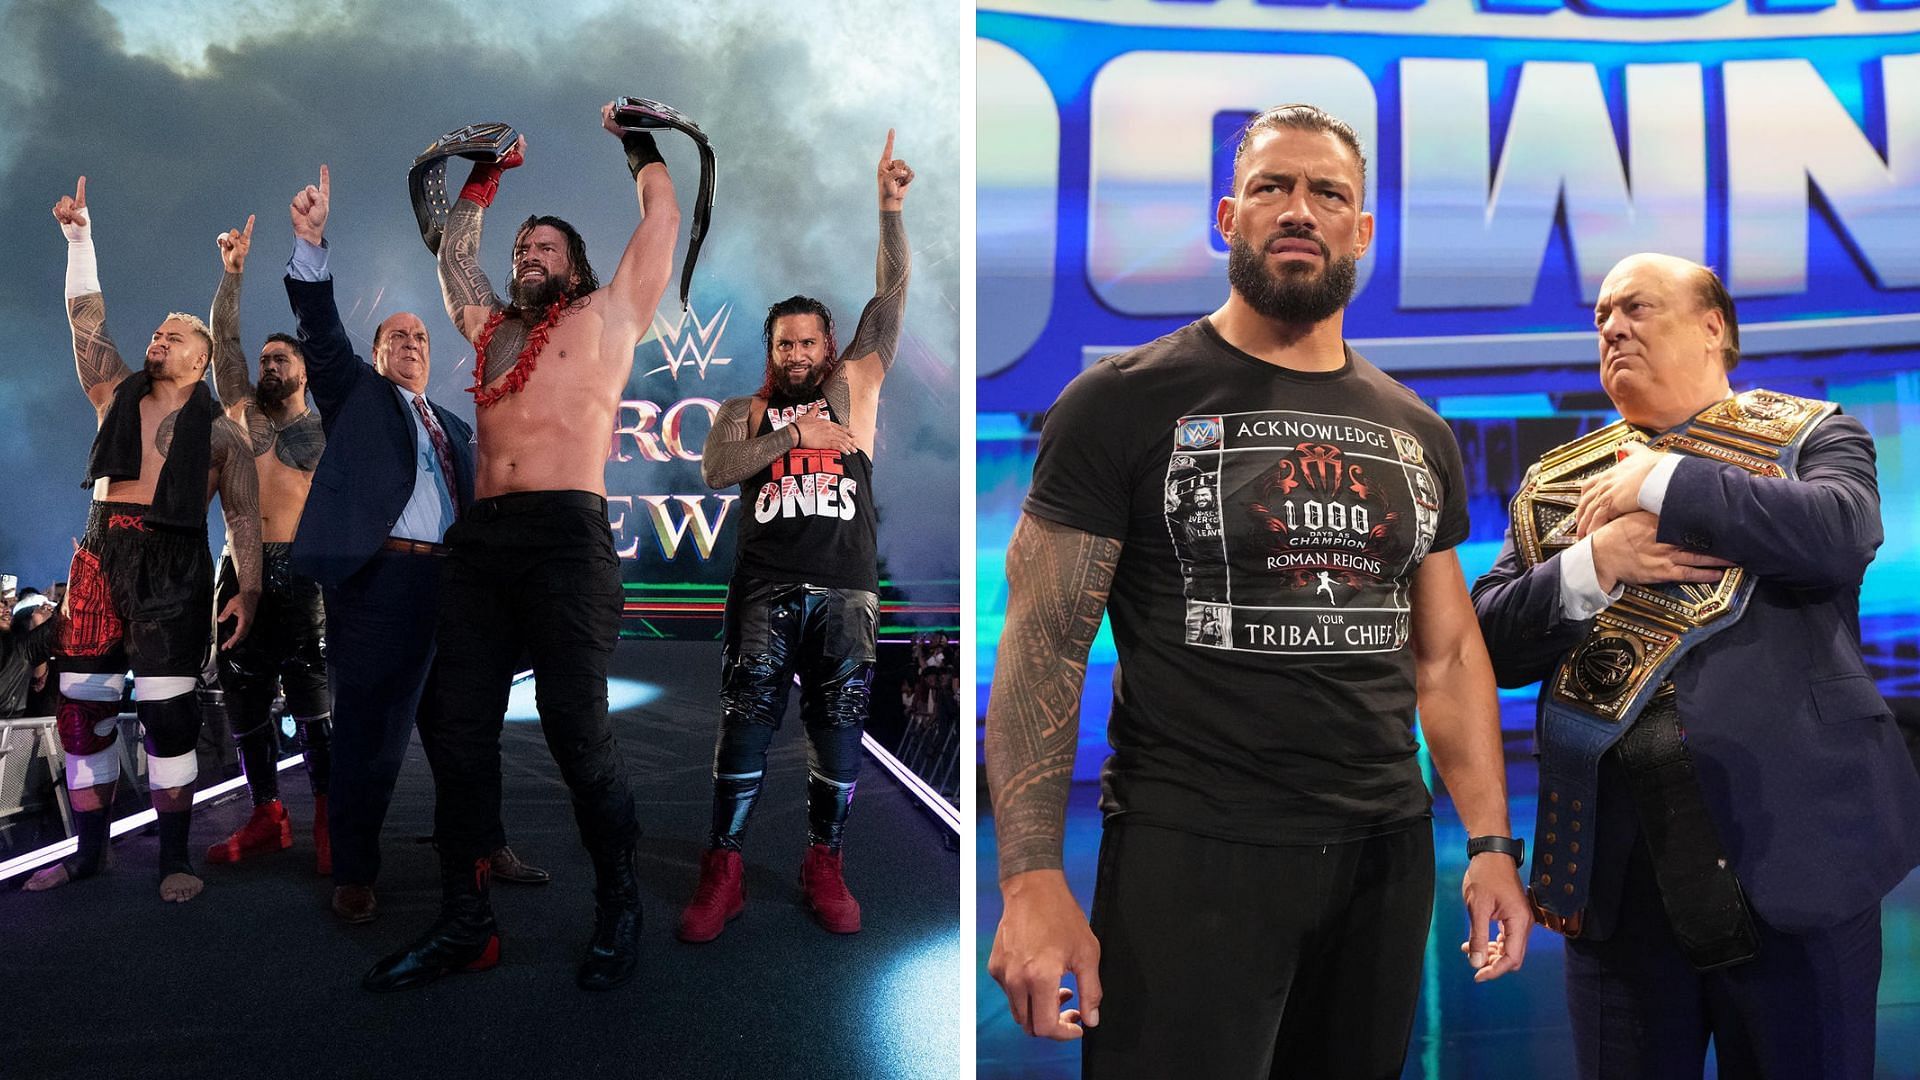 The Bloodline is one of the biggest factions in WWE